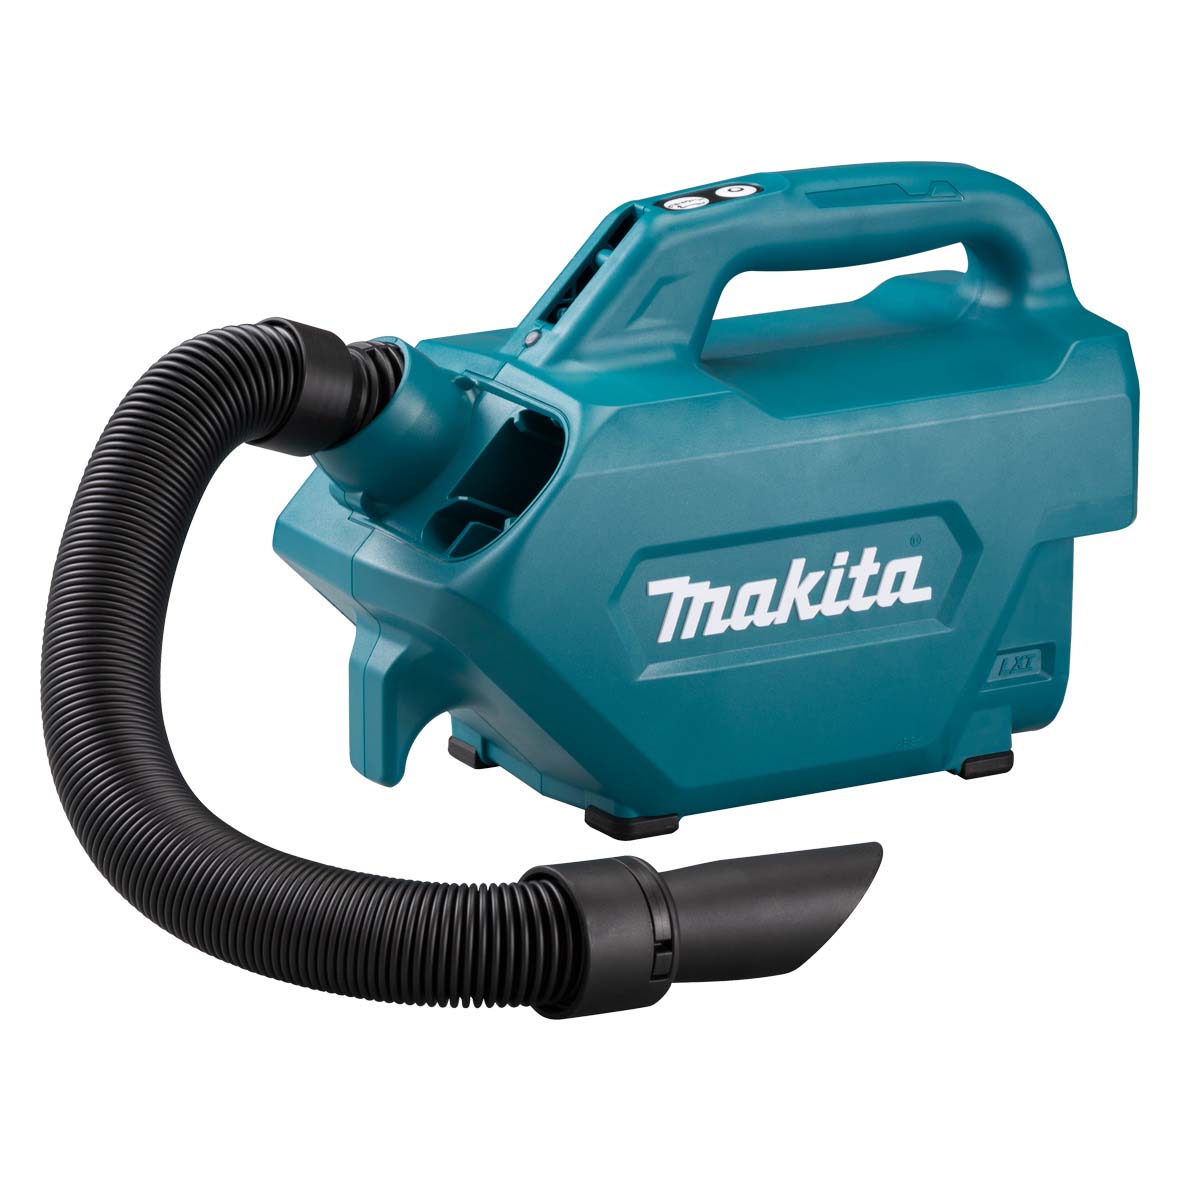 18V Vacuum Cleaner Bare (Tool Only) DCL184Z by Makita